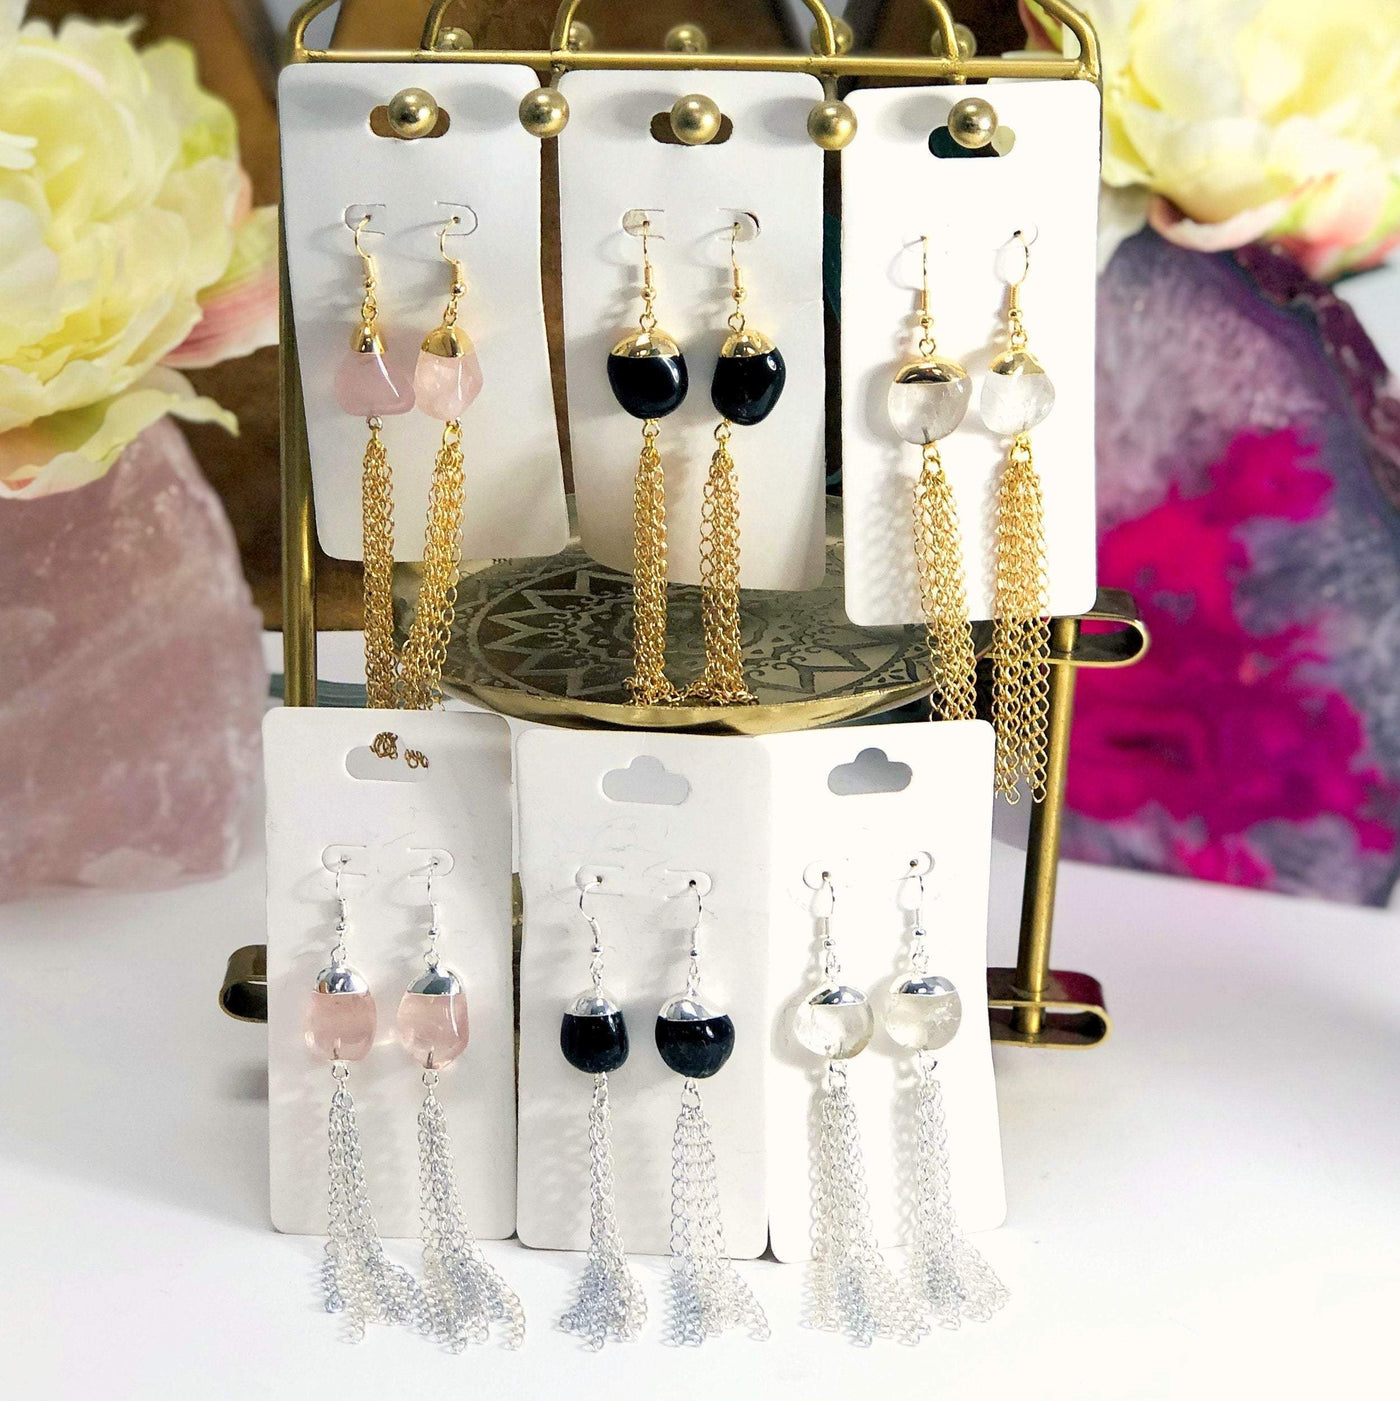 PAIR of Gemstone Earrings with tassels in Electroplated 24k Gold or Silver displayed to show they come in rose quartz black onyx and crystal quartz